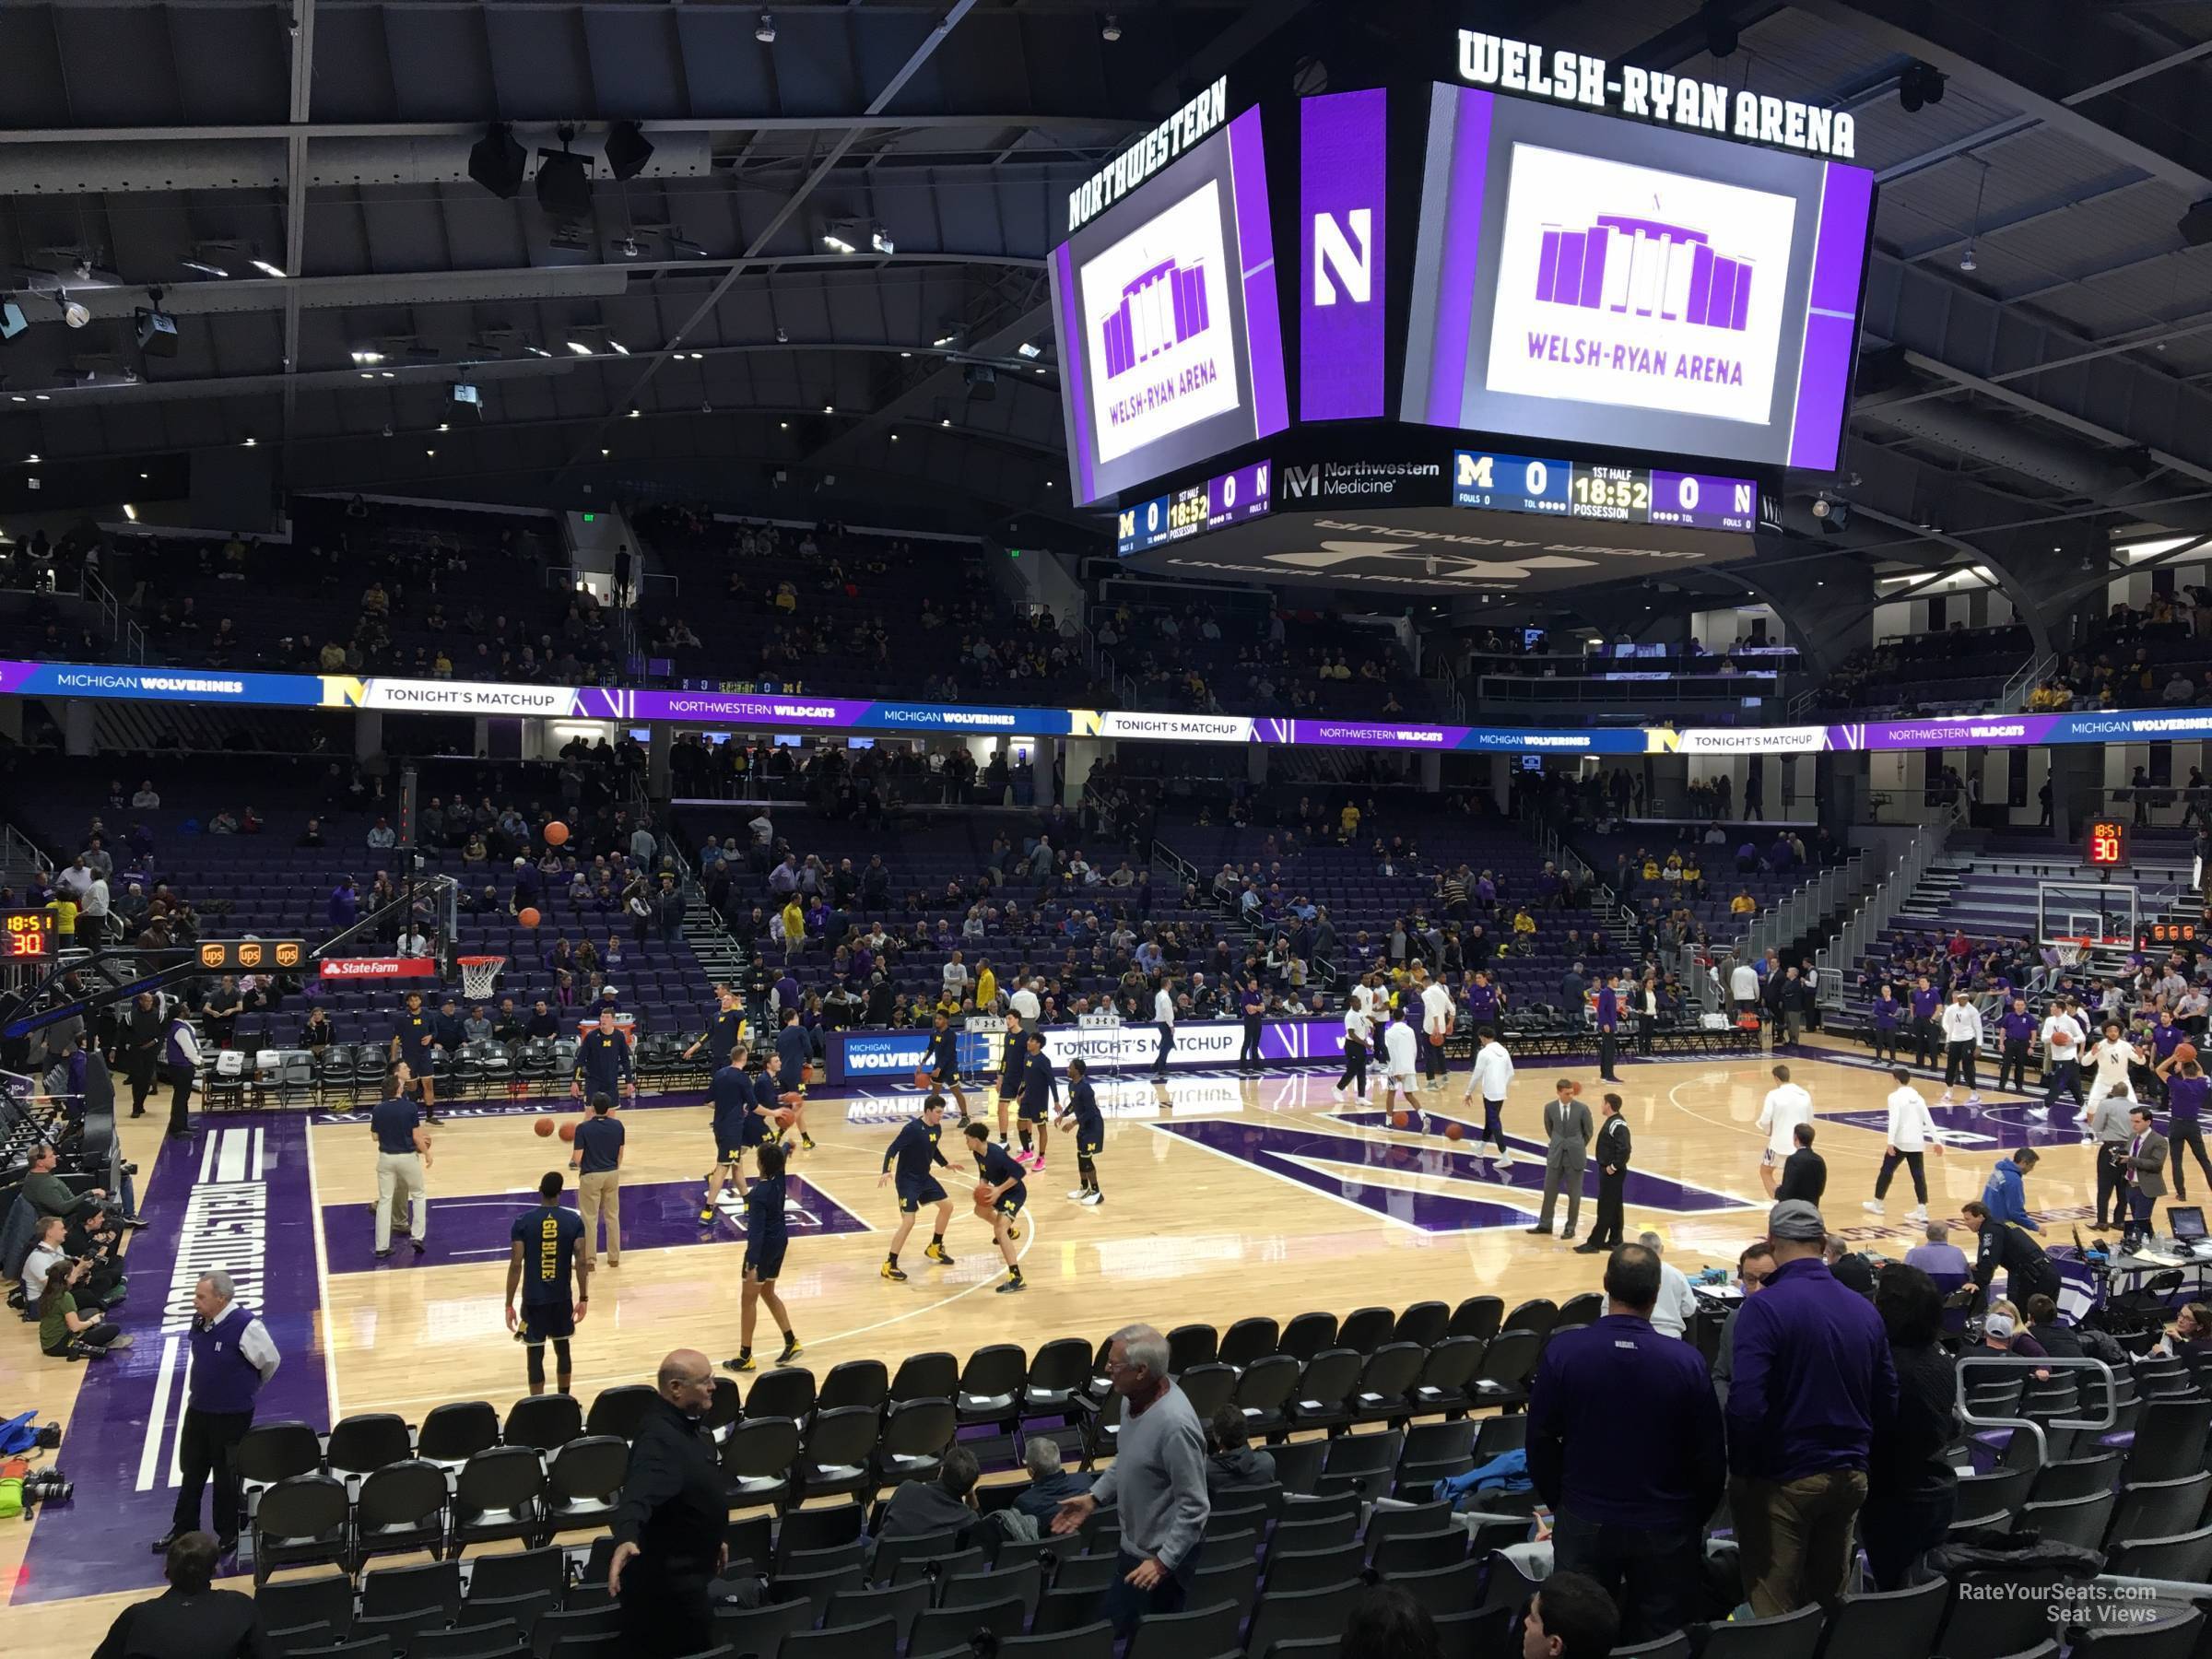 section 101, row 12 seat view  - welsh-ryan arena